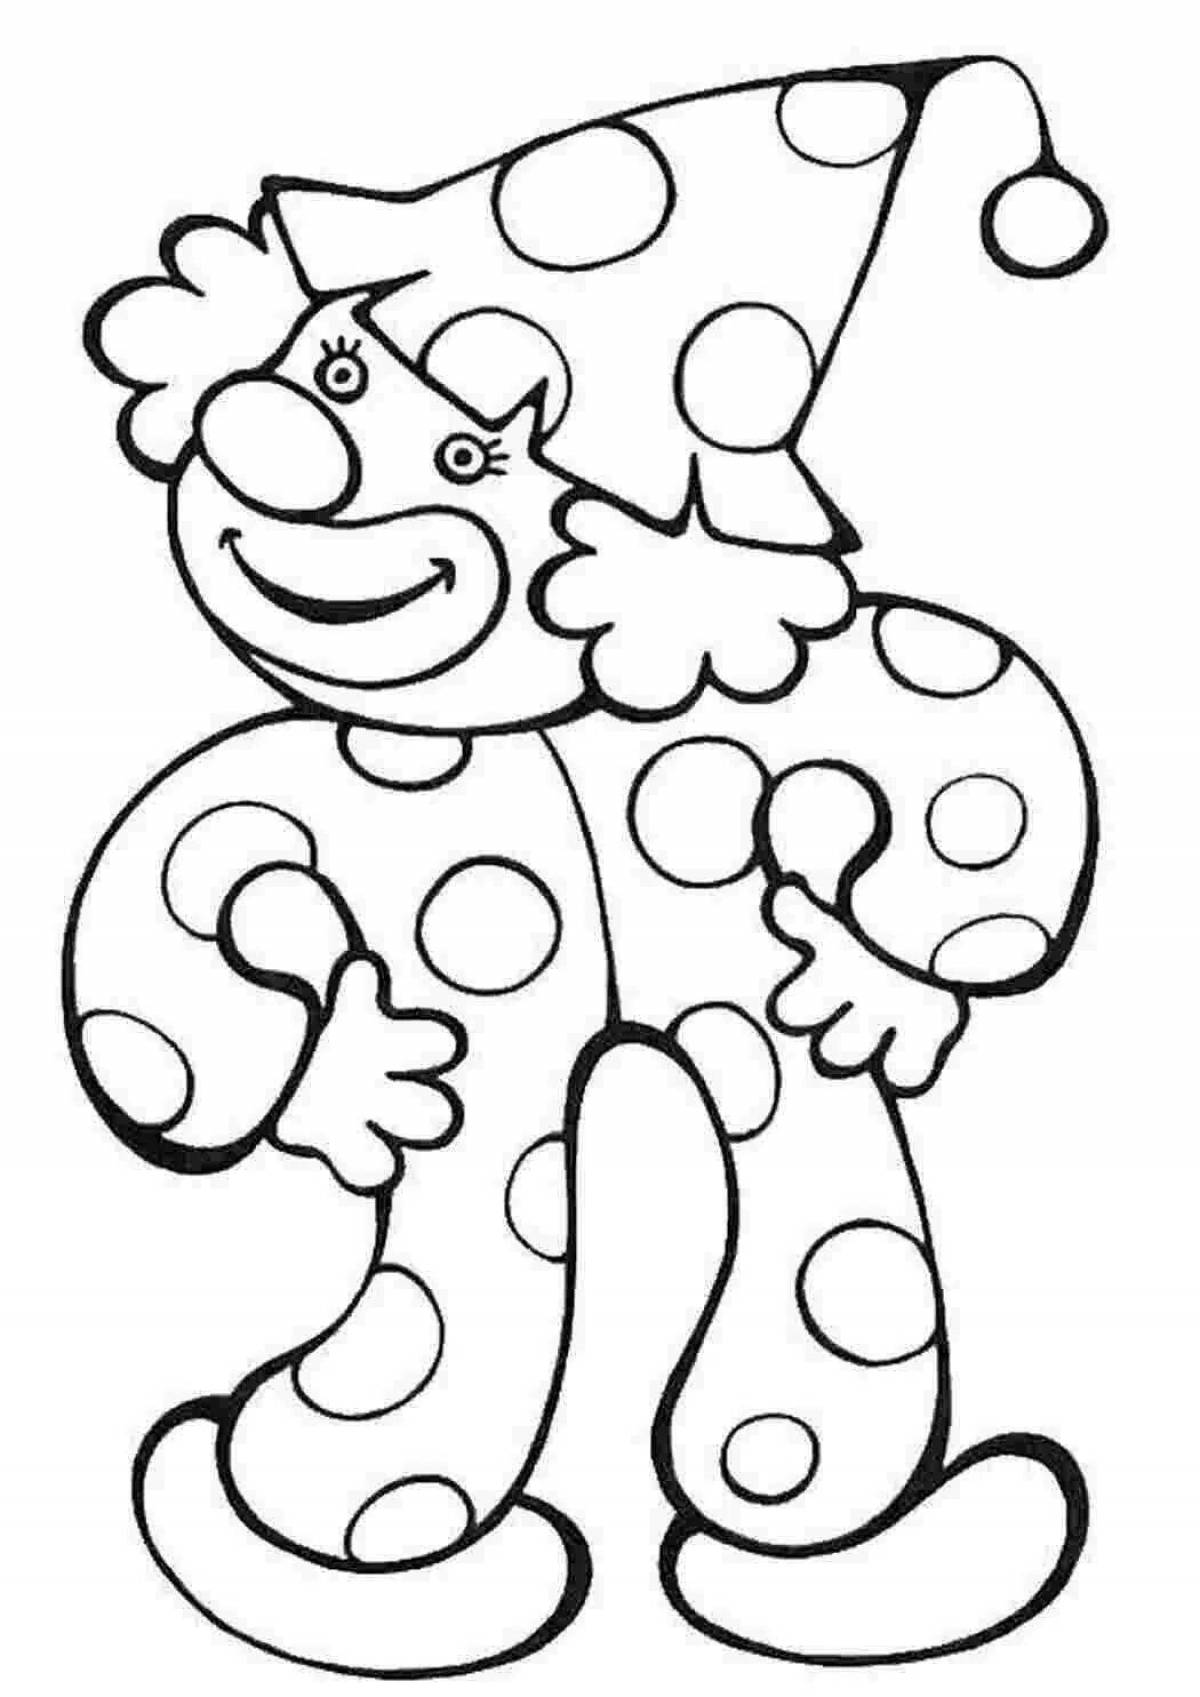 Coloring book funny clown for kids